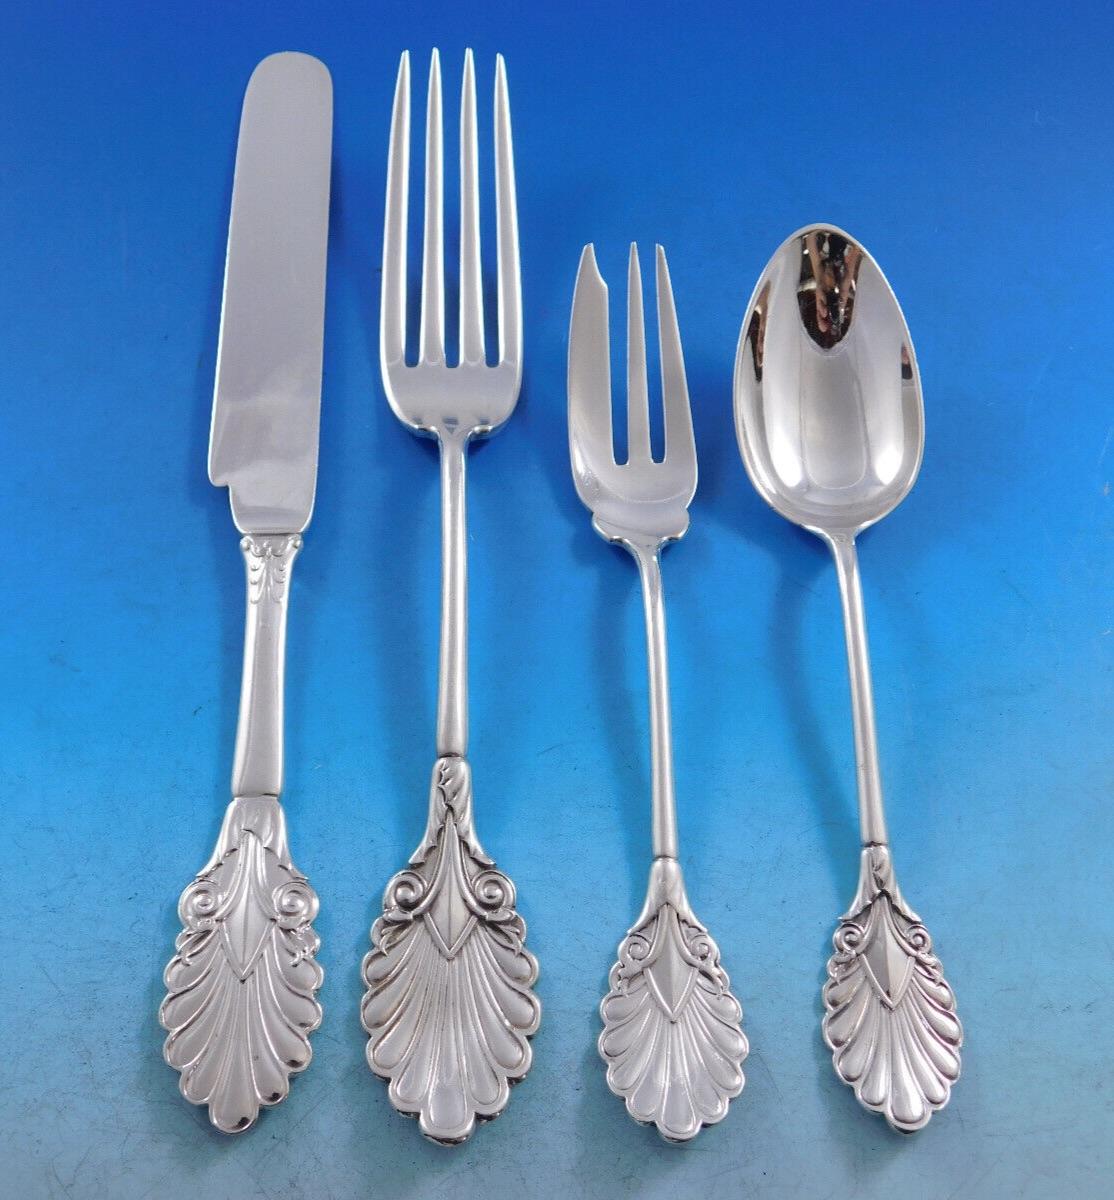 Grecian by Gorham Sterling Silver Flatware Service Rare circa 1861 Early 149 pcs For Sale 6